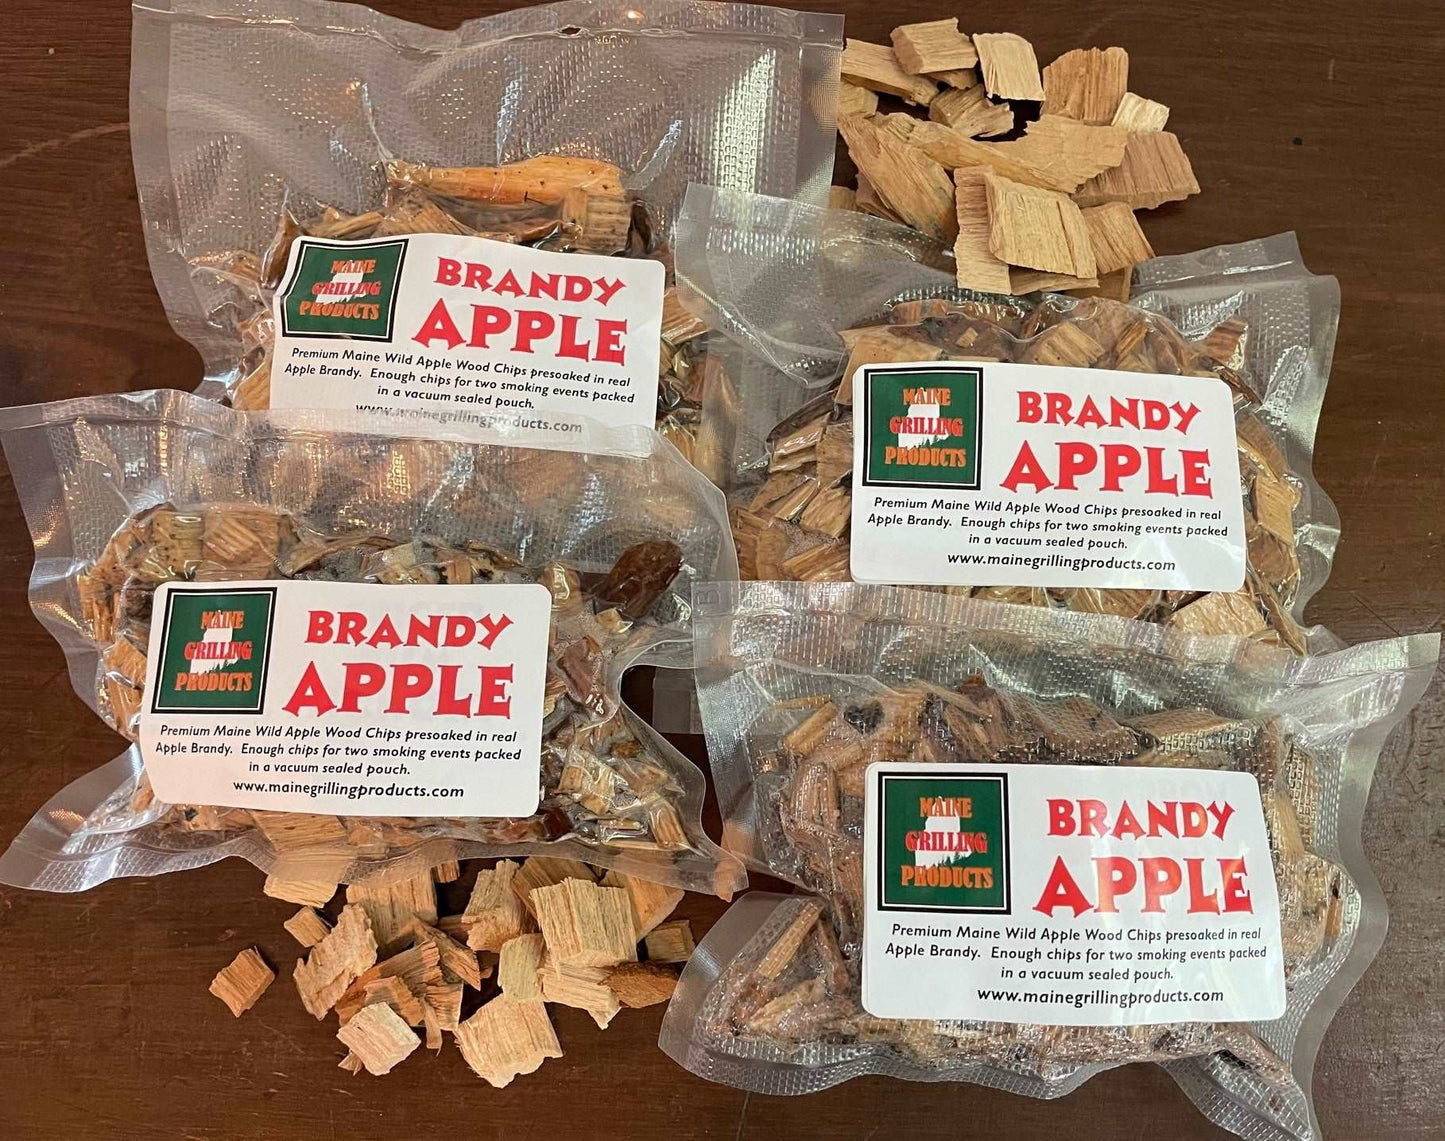 FOUR (6 OZ Pouches) PRE-SOAKED MAINE BRANDY APPLE WOOD CHIPS